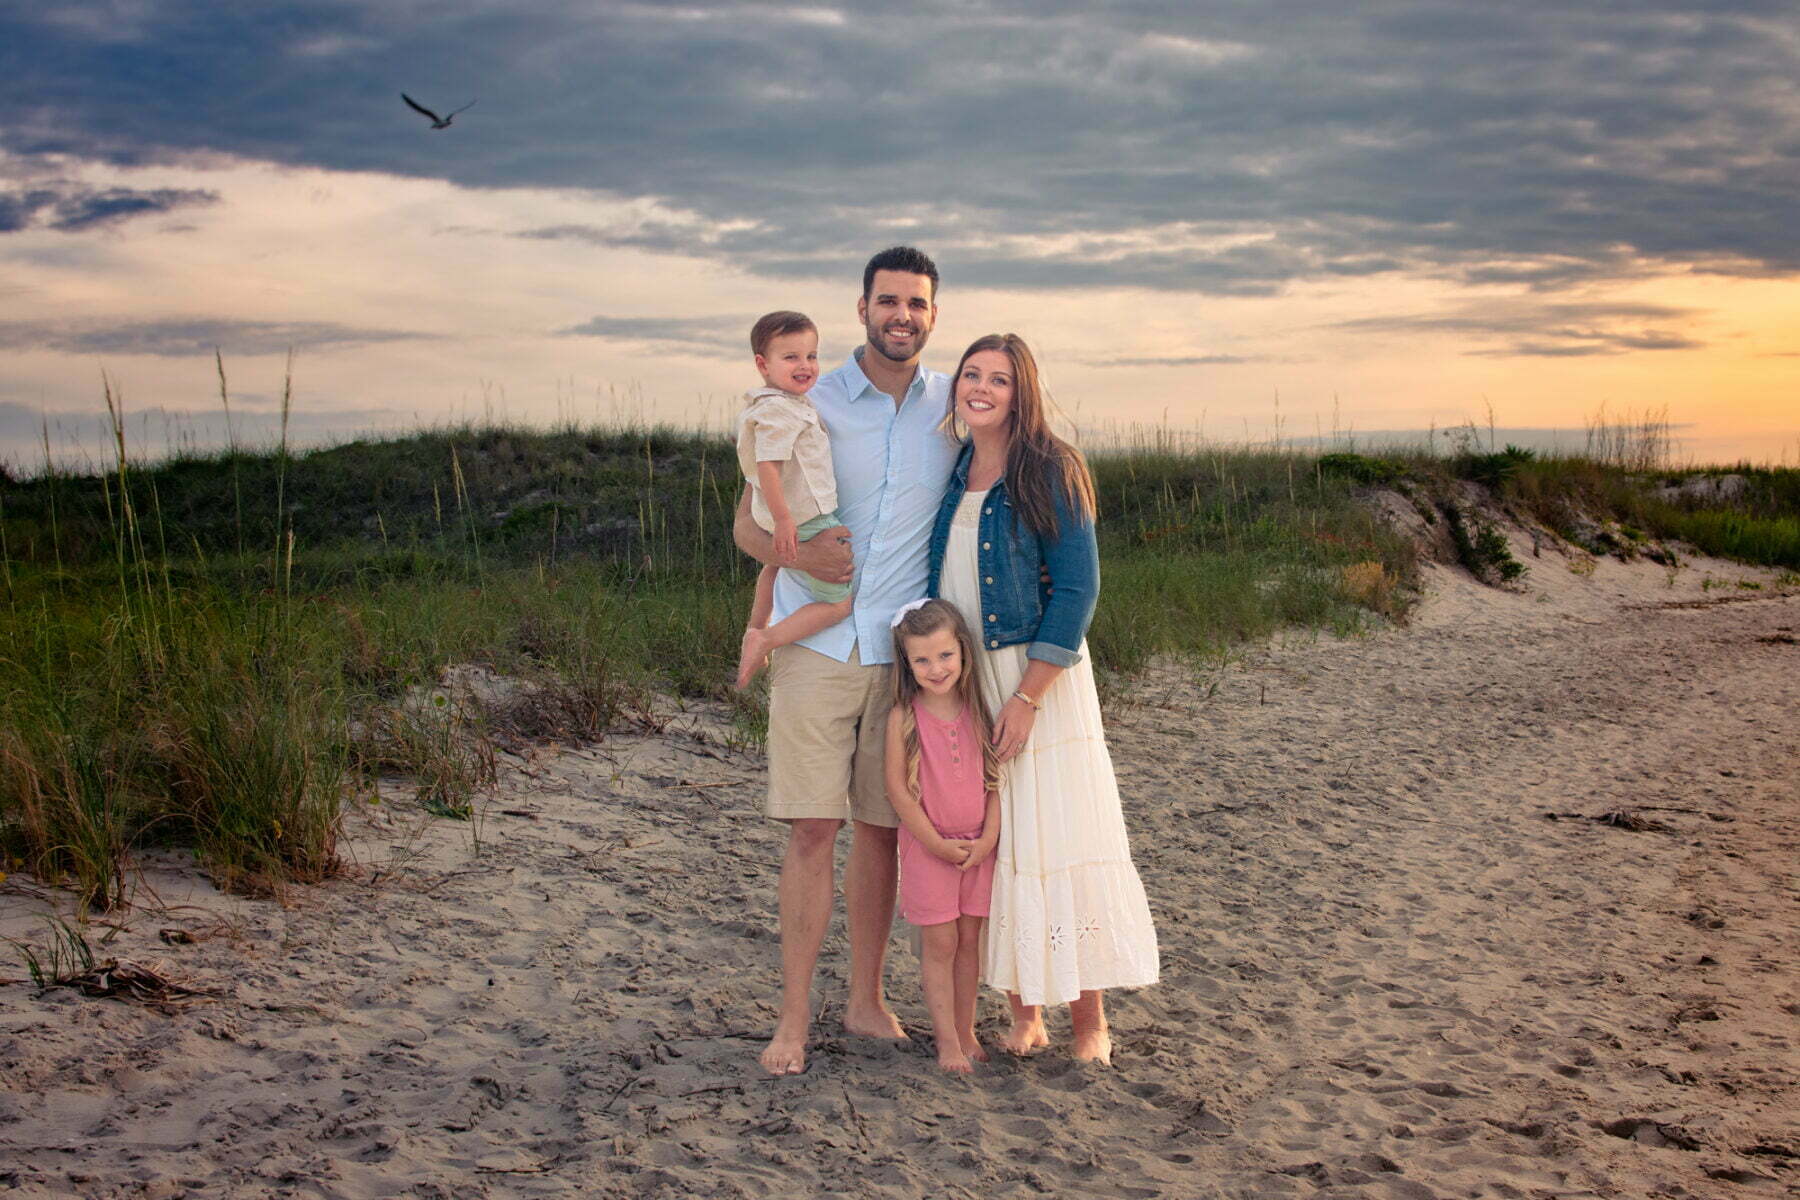 Lifestyle family photography session on Oak Island, NC beach at sunset.